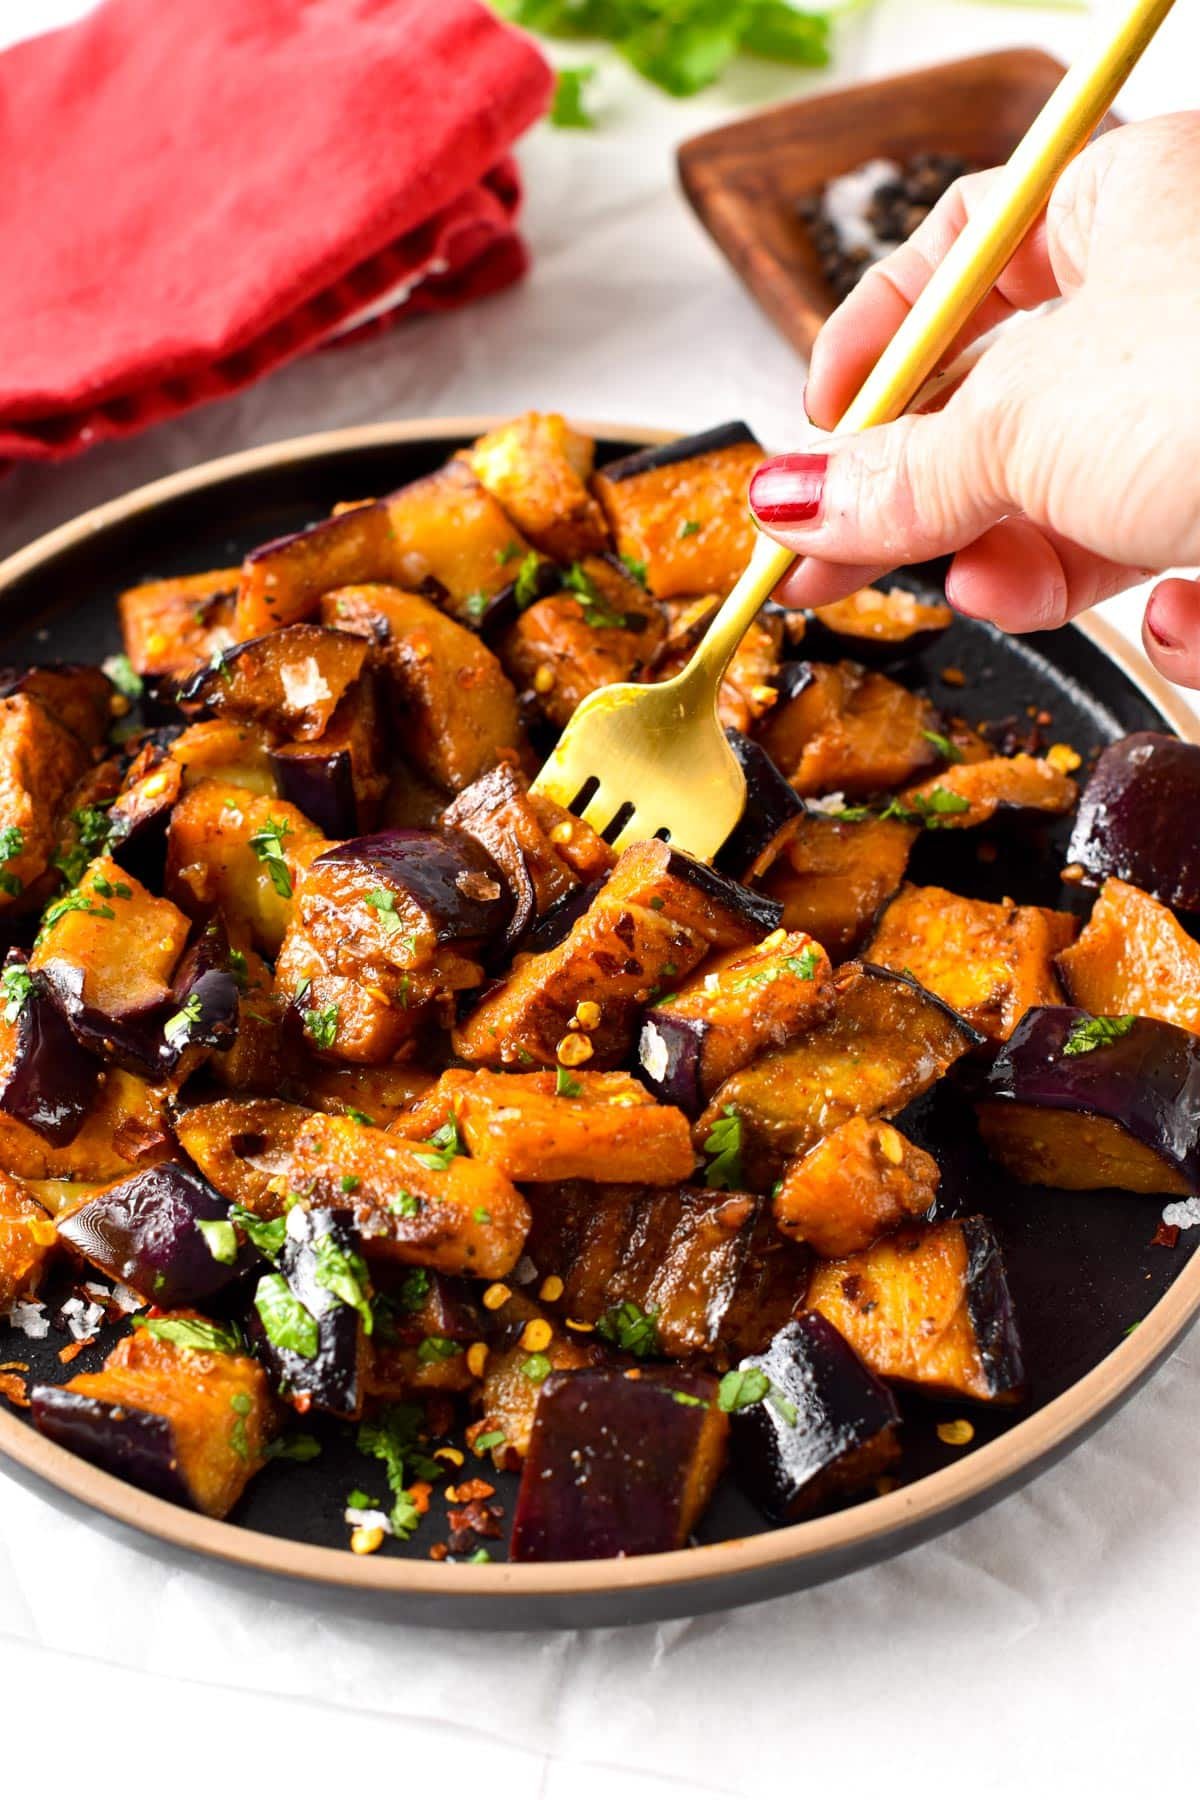 Learn how to turn eggplant into the best side dish this summer with this sauteed eggplant recipe. You will make everyone fall in love with these soft, tender, and caramelized pieces of pan-fried eggplant, on your next BBQ party.